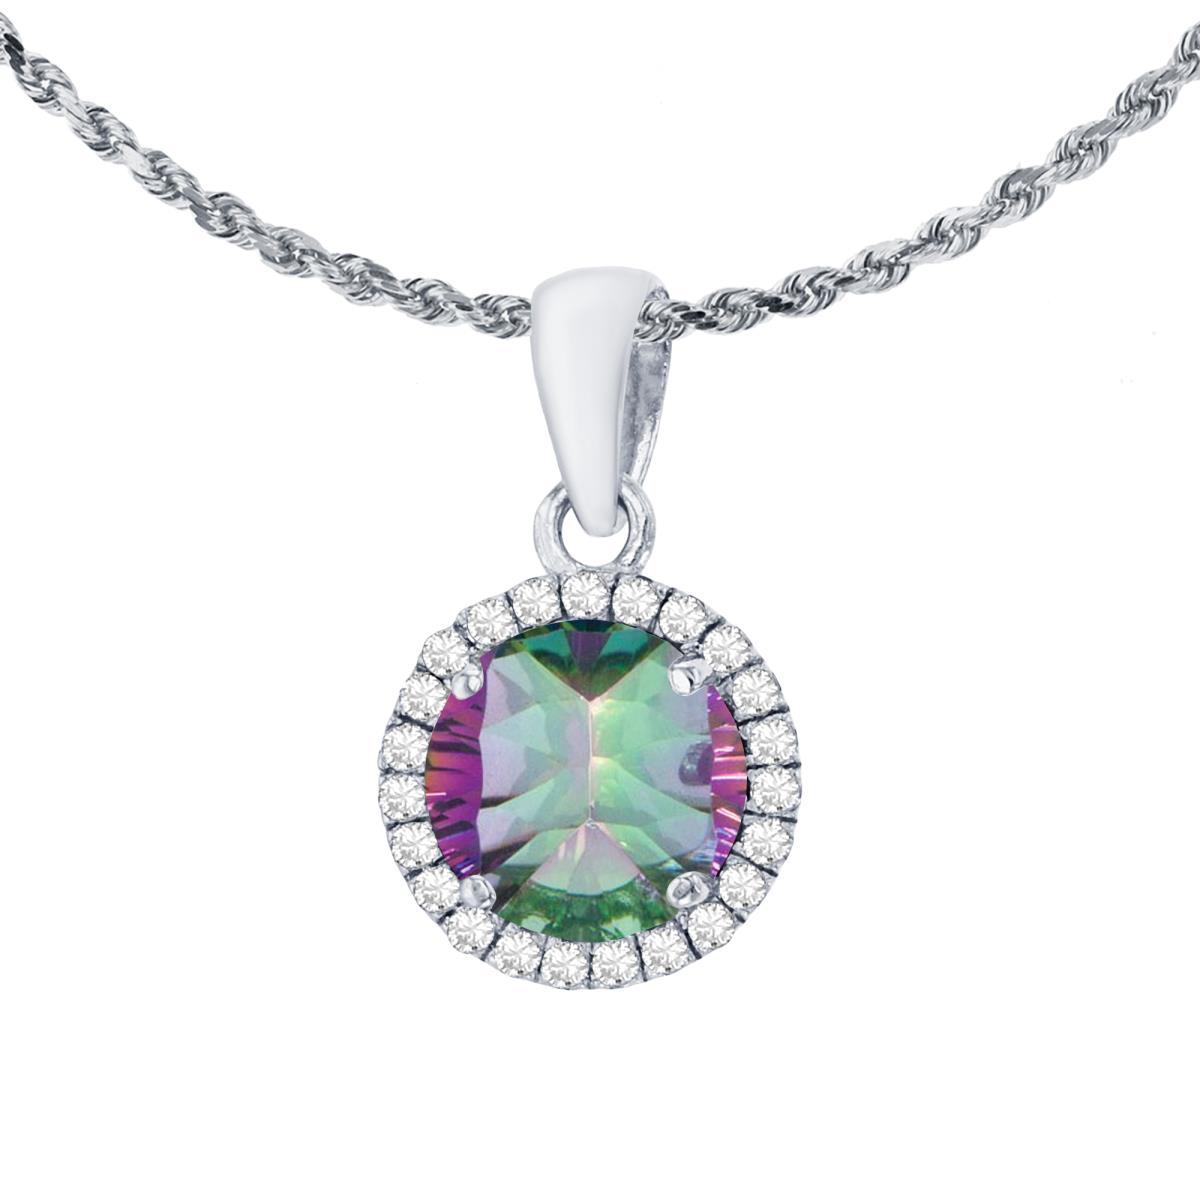 14K White Gold 7mm Round Mystic Green Topaz & 0.12 CTTW Diamond Halo 18" Rope Chain Necklace